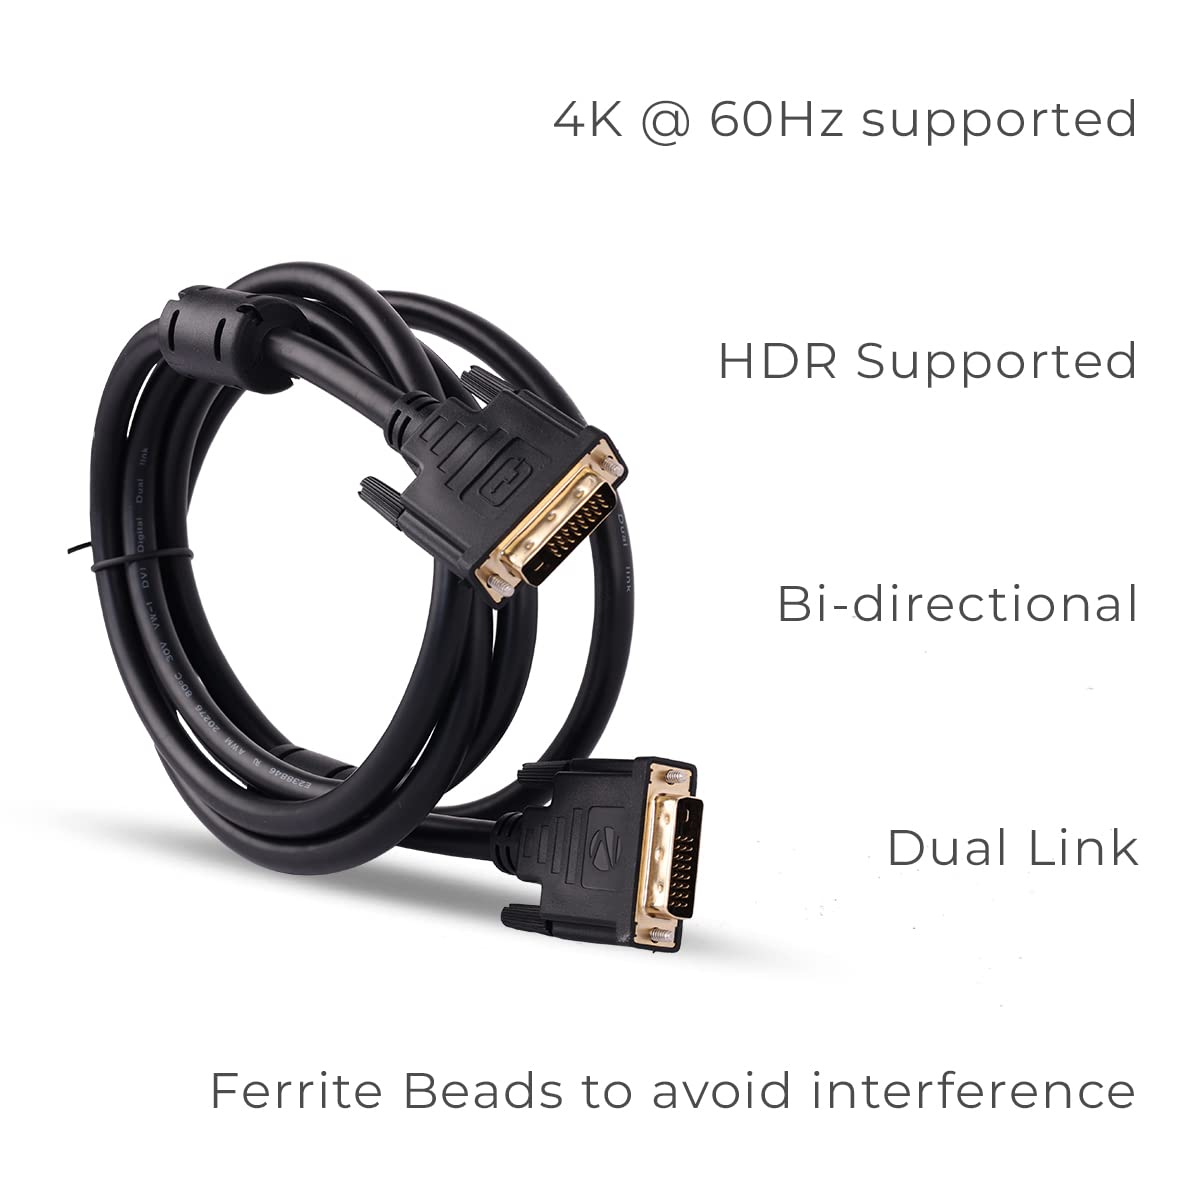 ZEBRONICS DVI20 2 Meters DVI-D Dual link cable with 4K @ 60Hz resolution support, HDR, Gold plated connectors, Bi-directional usage, Plug play, Strong and durable build quality